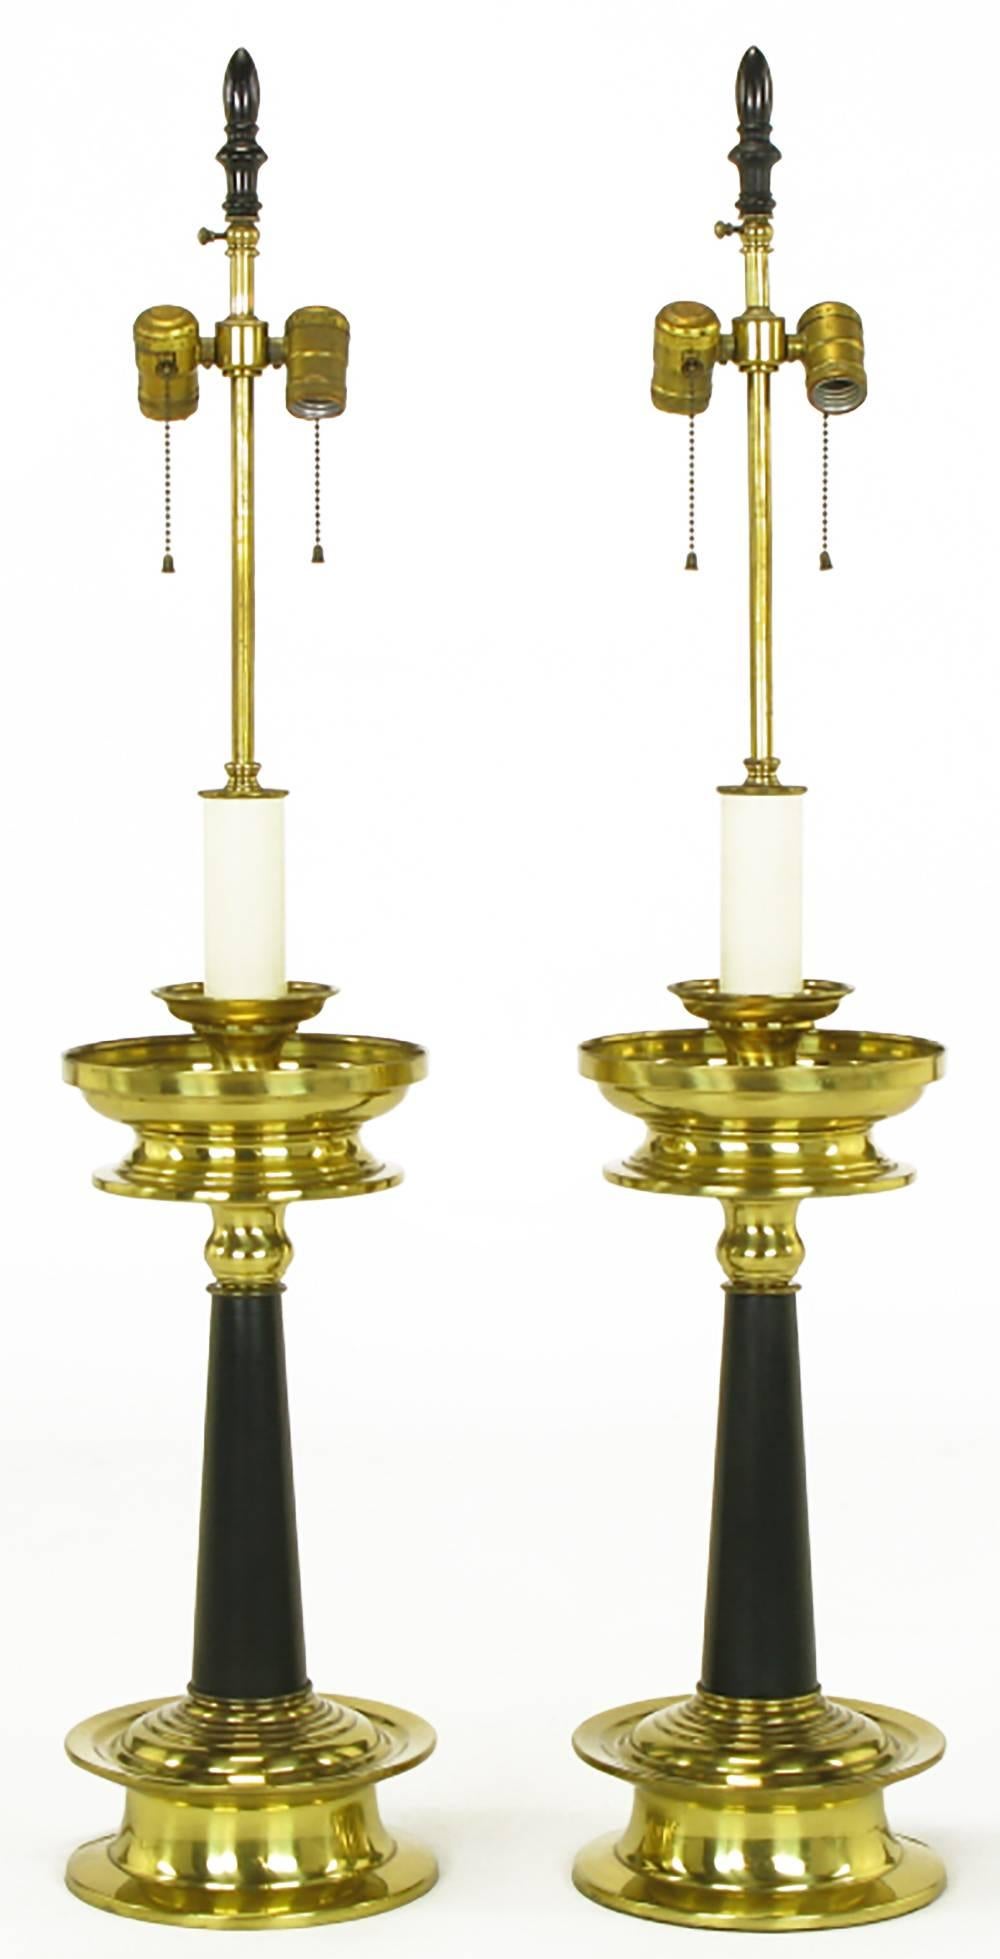 Pair of substantial brass and black lacquer table lamps with double top bobeches. Double socket cluster atop a brass stem and off-white candle style spacer. Similar in style and substance to lamps by Stiffel and Marbro.